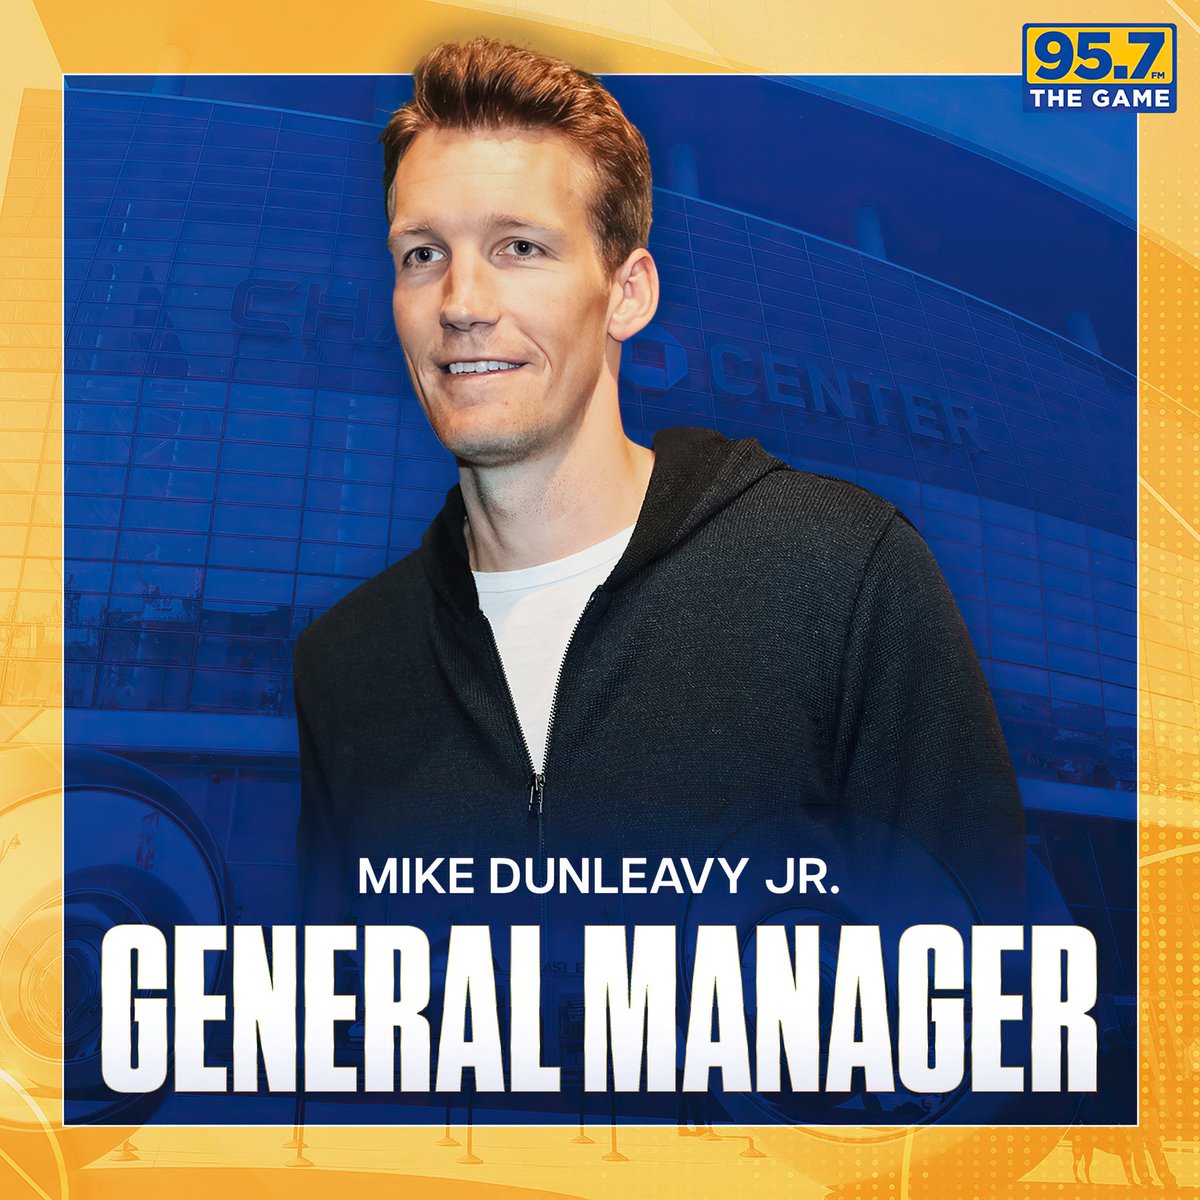 The Warriors and Mike Dunleavy Jr. have agreed to a deal to become the new general manager, via @wojespn.